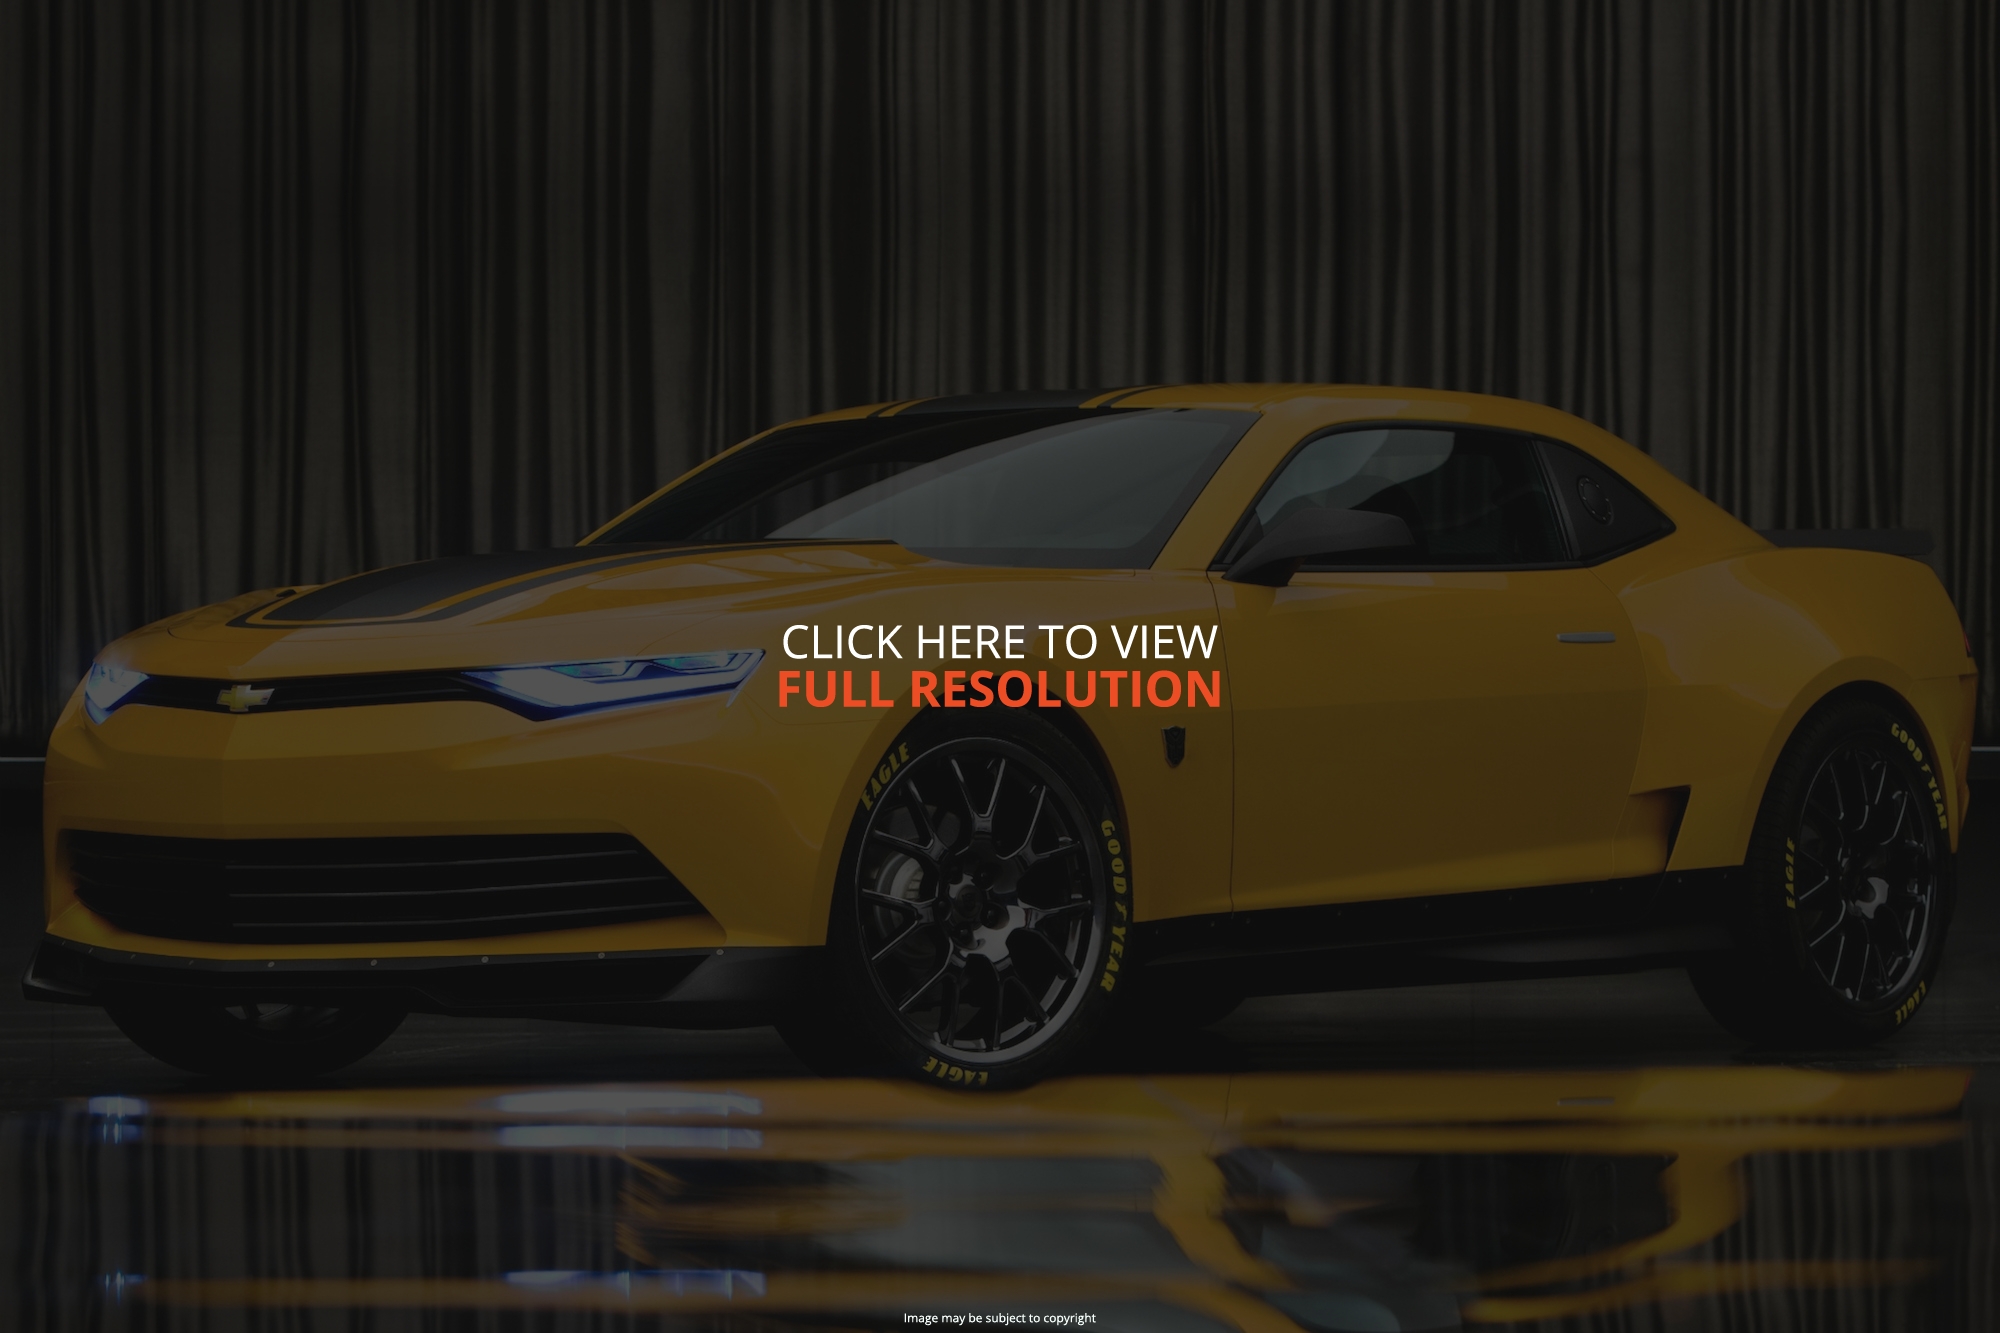 2014 Chevrolet Camaro Bumblebee Concept Images | Pictures and Videos